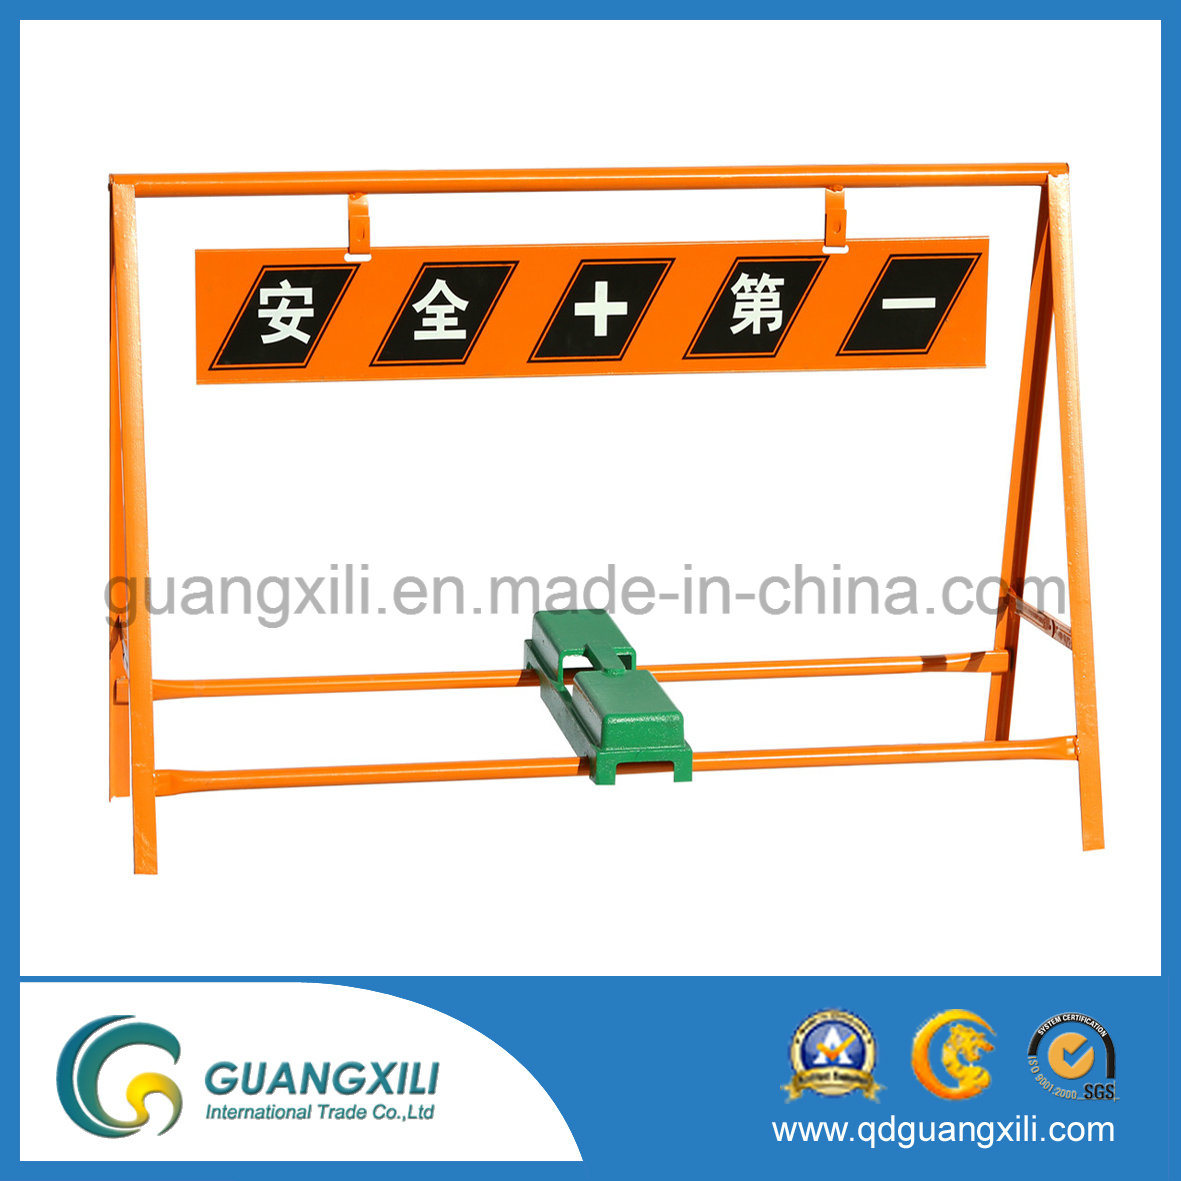 /proimages/2f0j00vjLEAYGPaOpQ/galvanization-iron-double-sides-road-barrier-for-warning-sign-in-japan-type.jpg